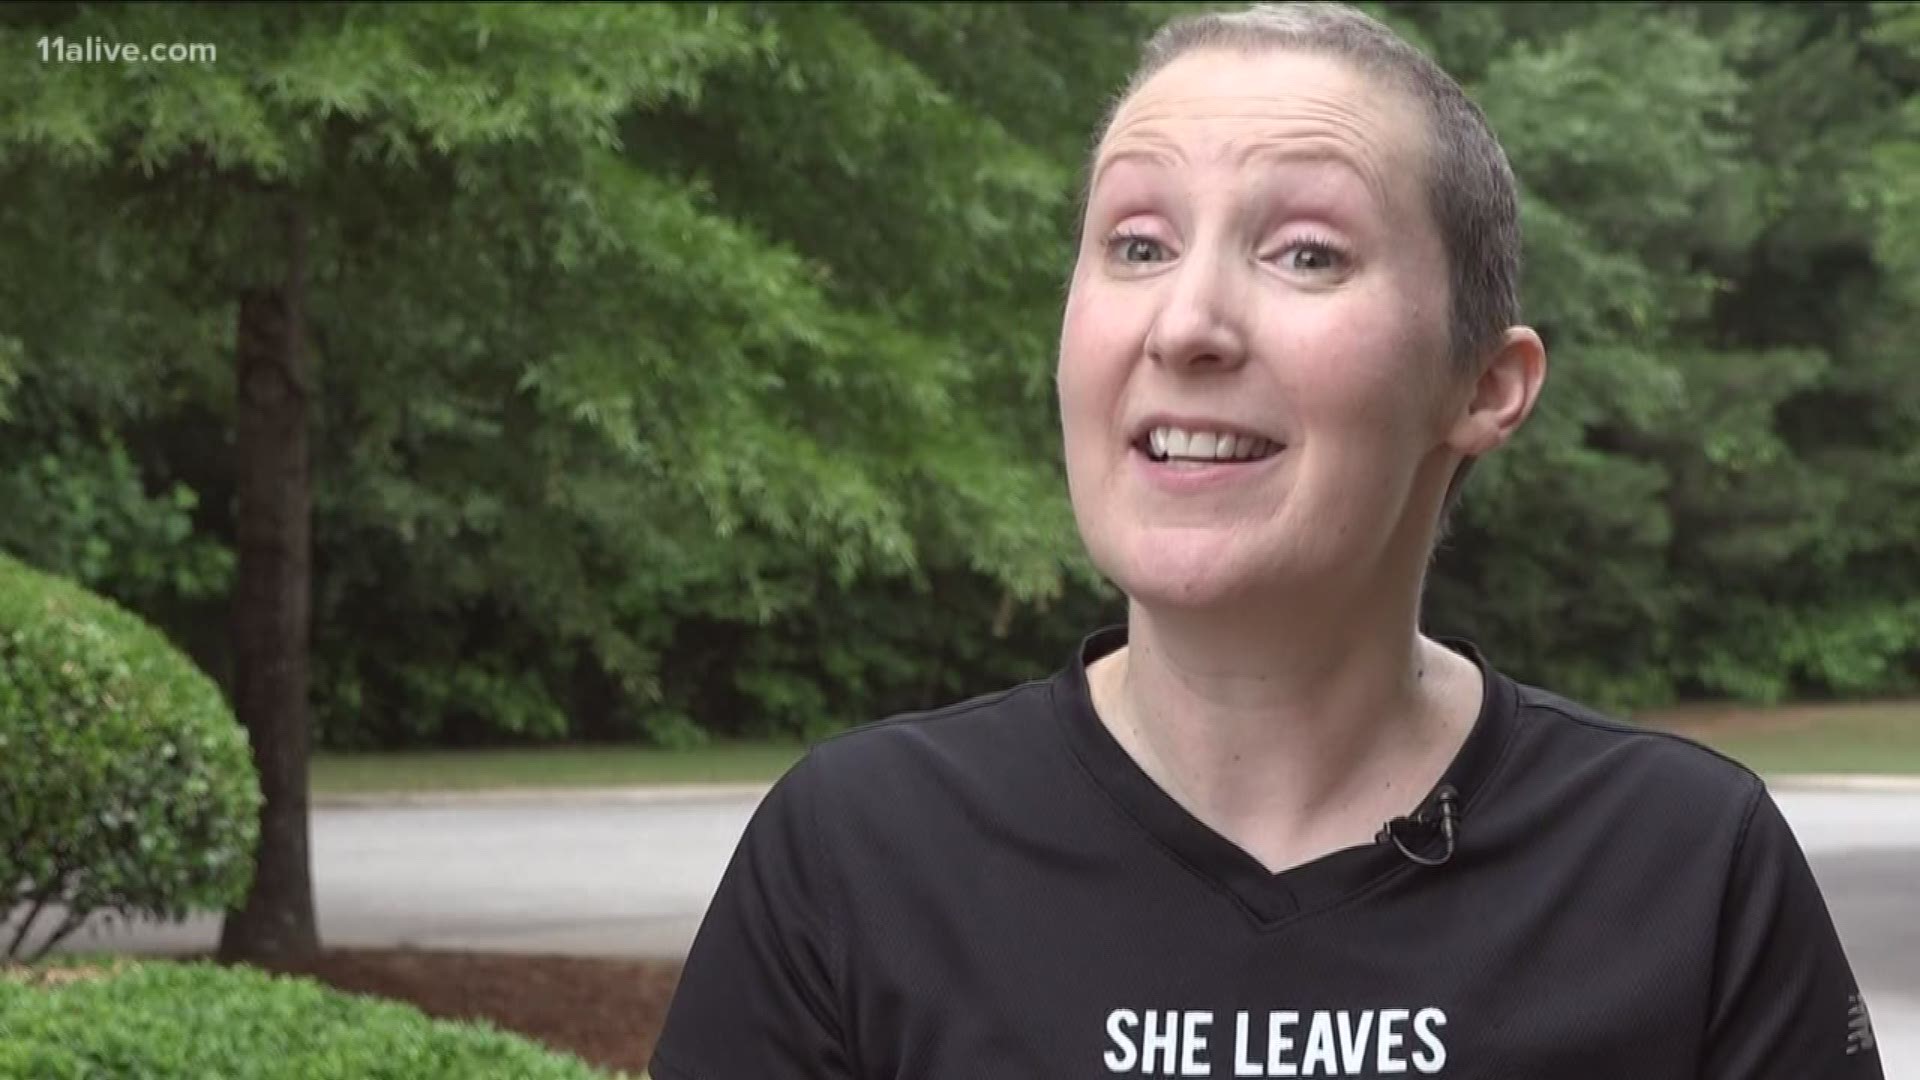 A sudden diagnosis stole the 2018 AJC Peachtree Road Race from her. Now, Laura Youngblood is ready to return to the starting line.